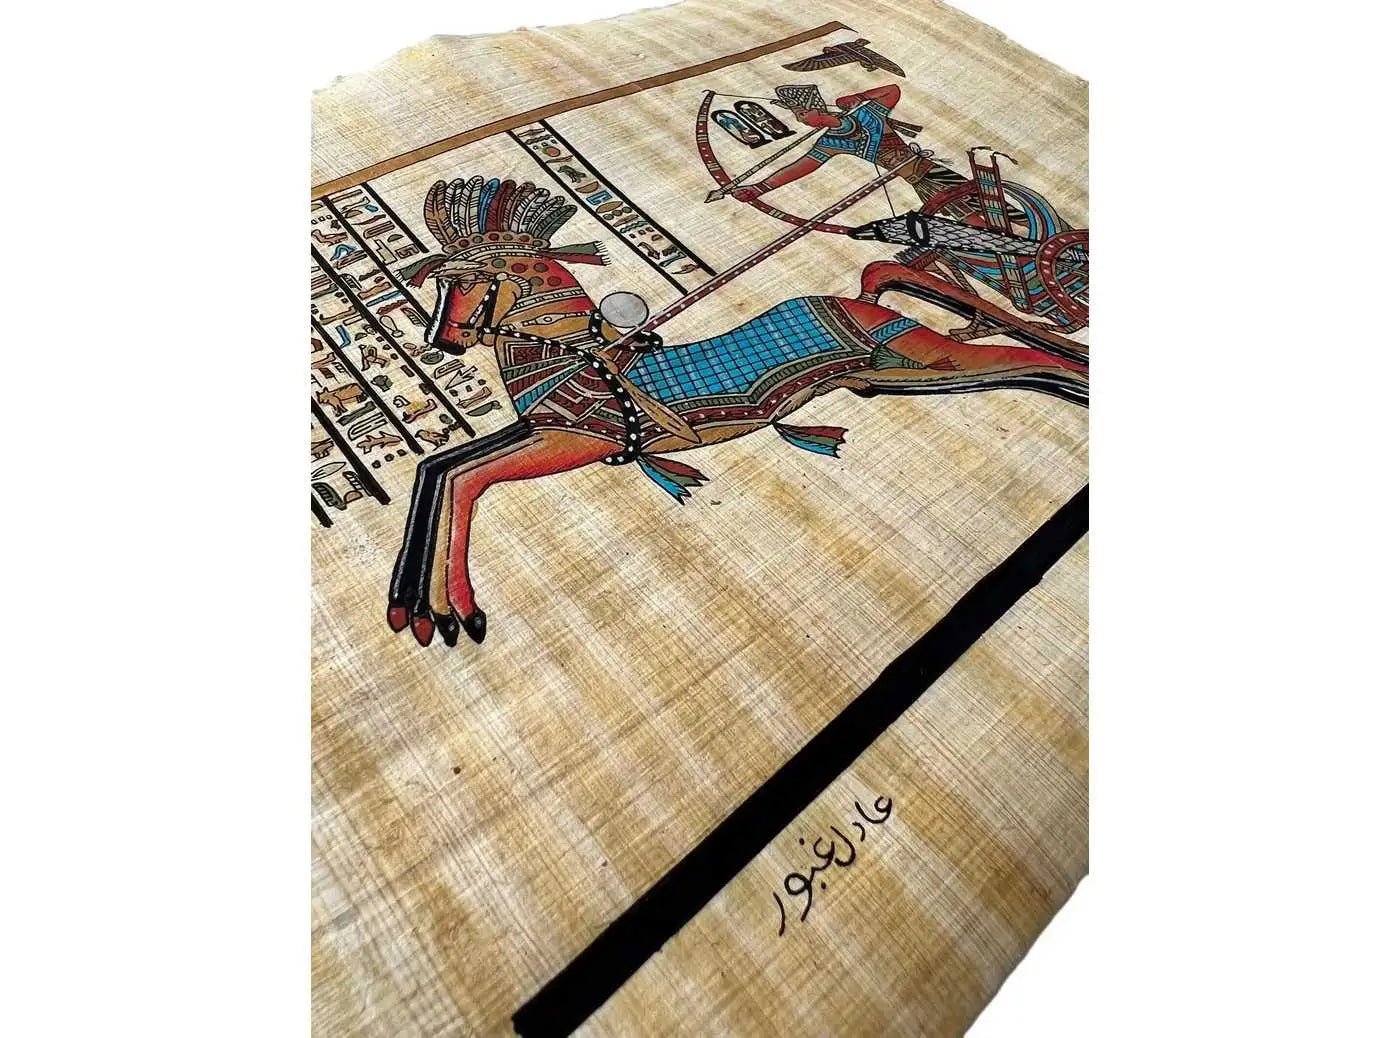 Pharaoh Ramses II on Chariot Battle of Nubia - Papyrus Egyptian Hand-Made Papyrus Painting - Egypt Decor